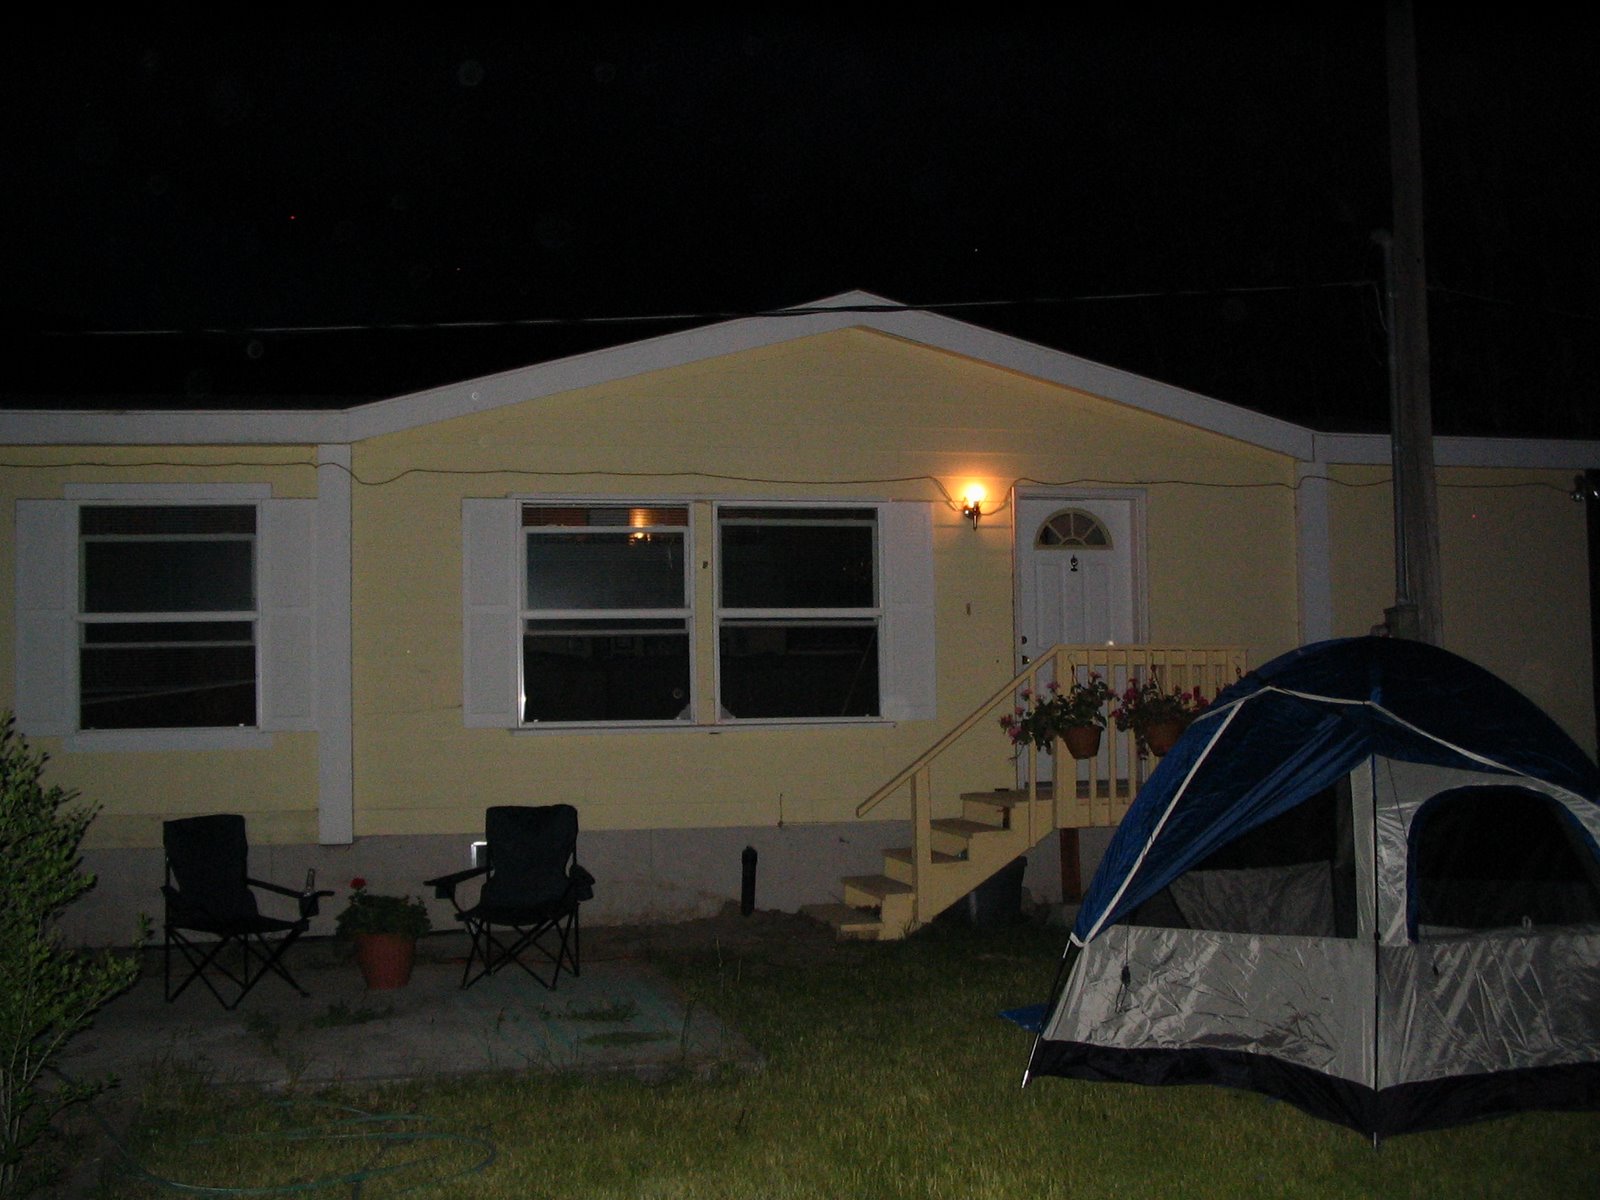 [Camping+in+the+front+yard+when+the+house+is+90+degrees+inside.+June+3,+2007.jpg]